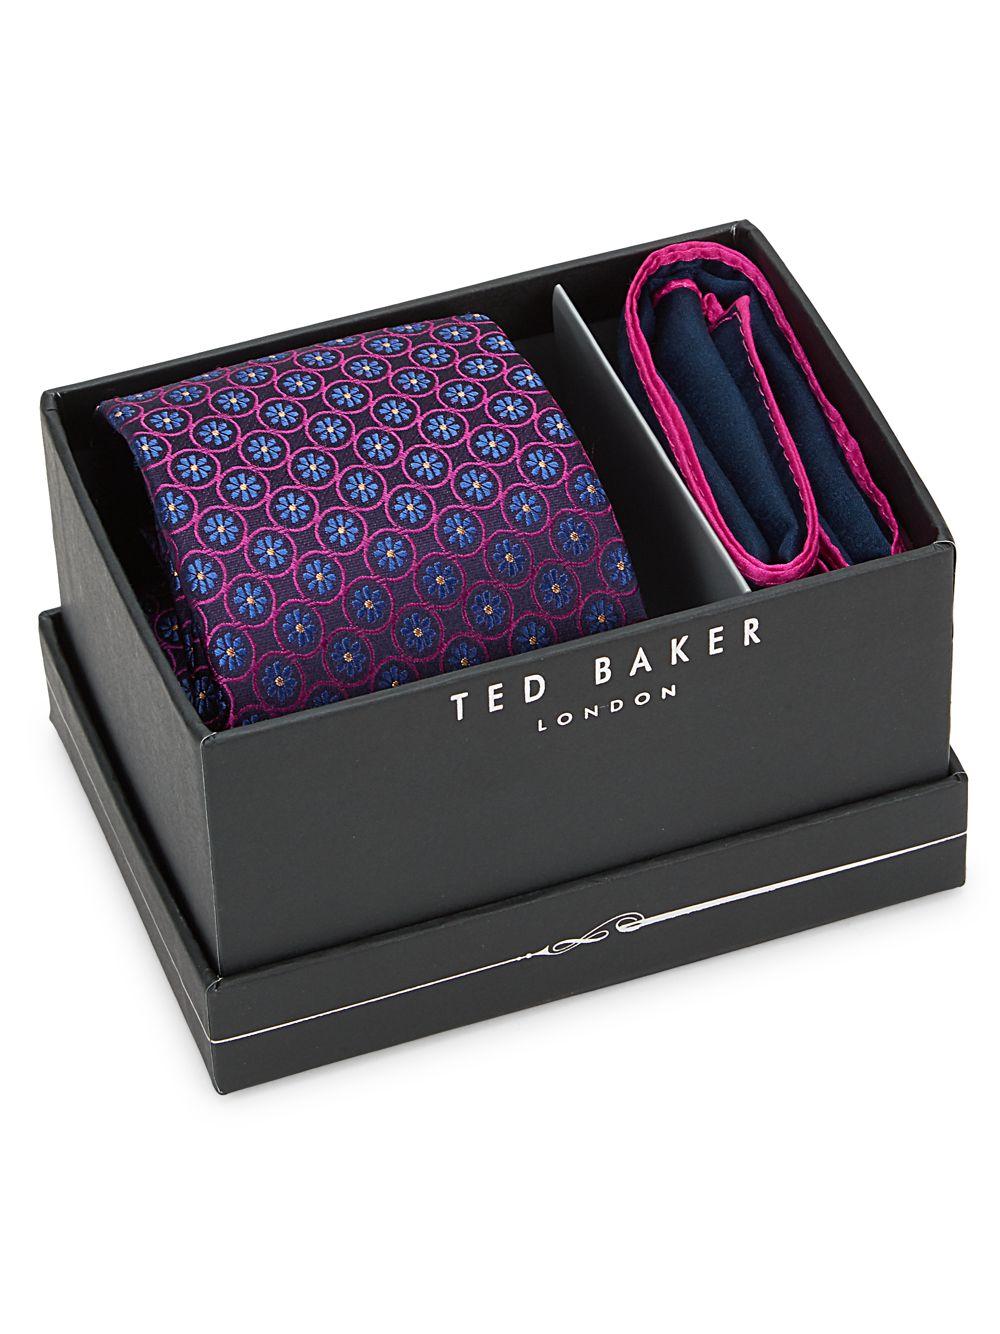 Ted Baker London men's Skinny Navy 2.75 inches Floral tie $95 